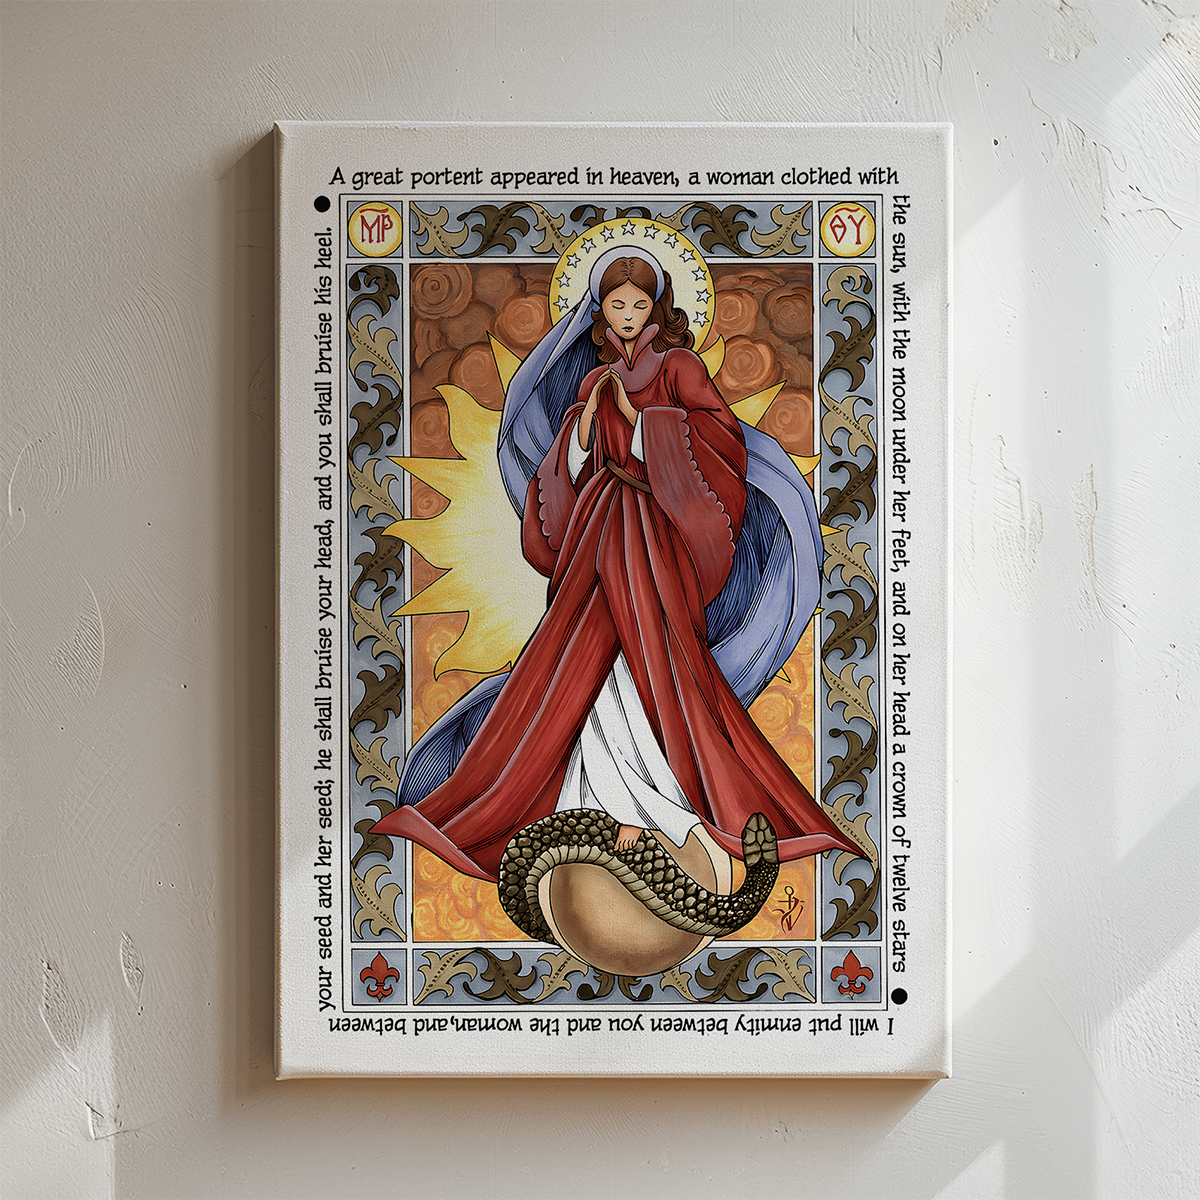 Immaculate Conception Premium Canvas Gallery Print